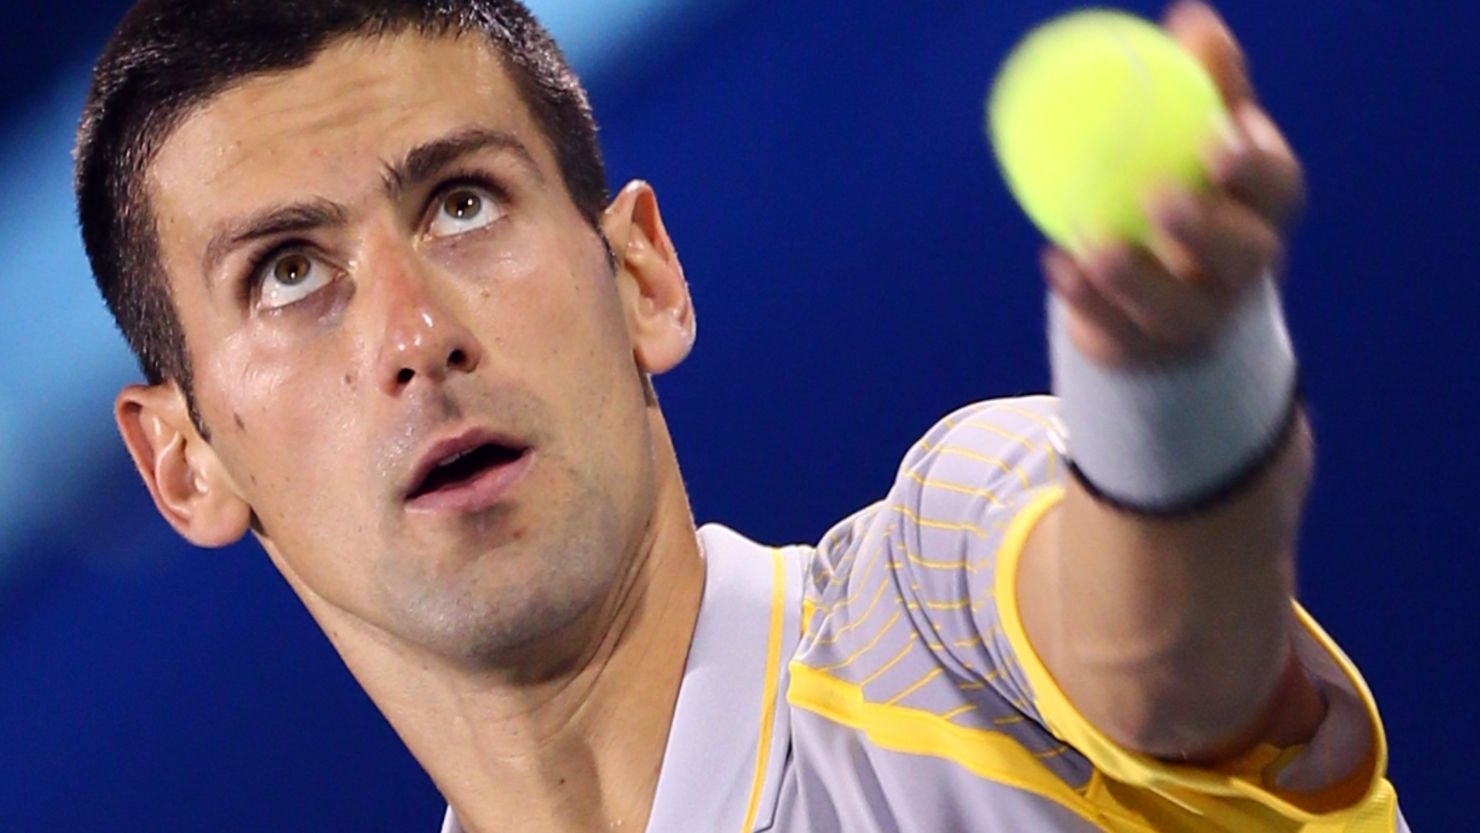 Novak Djokovic serves during his straight sets win over Andreas Seppi in the quarterfinals in Dubai. 